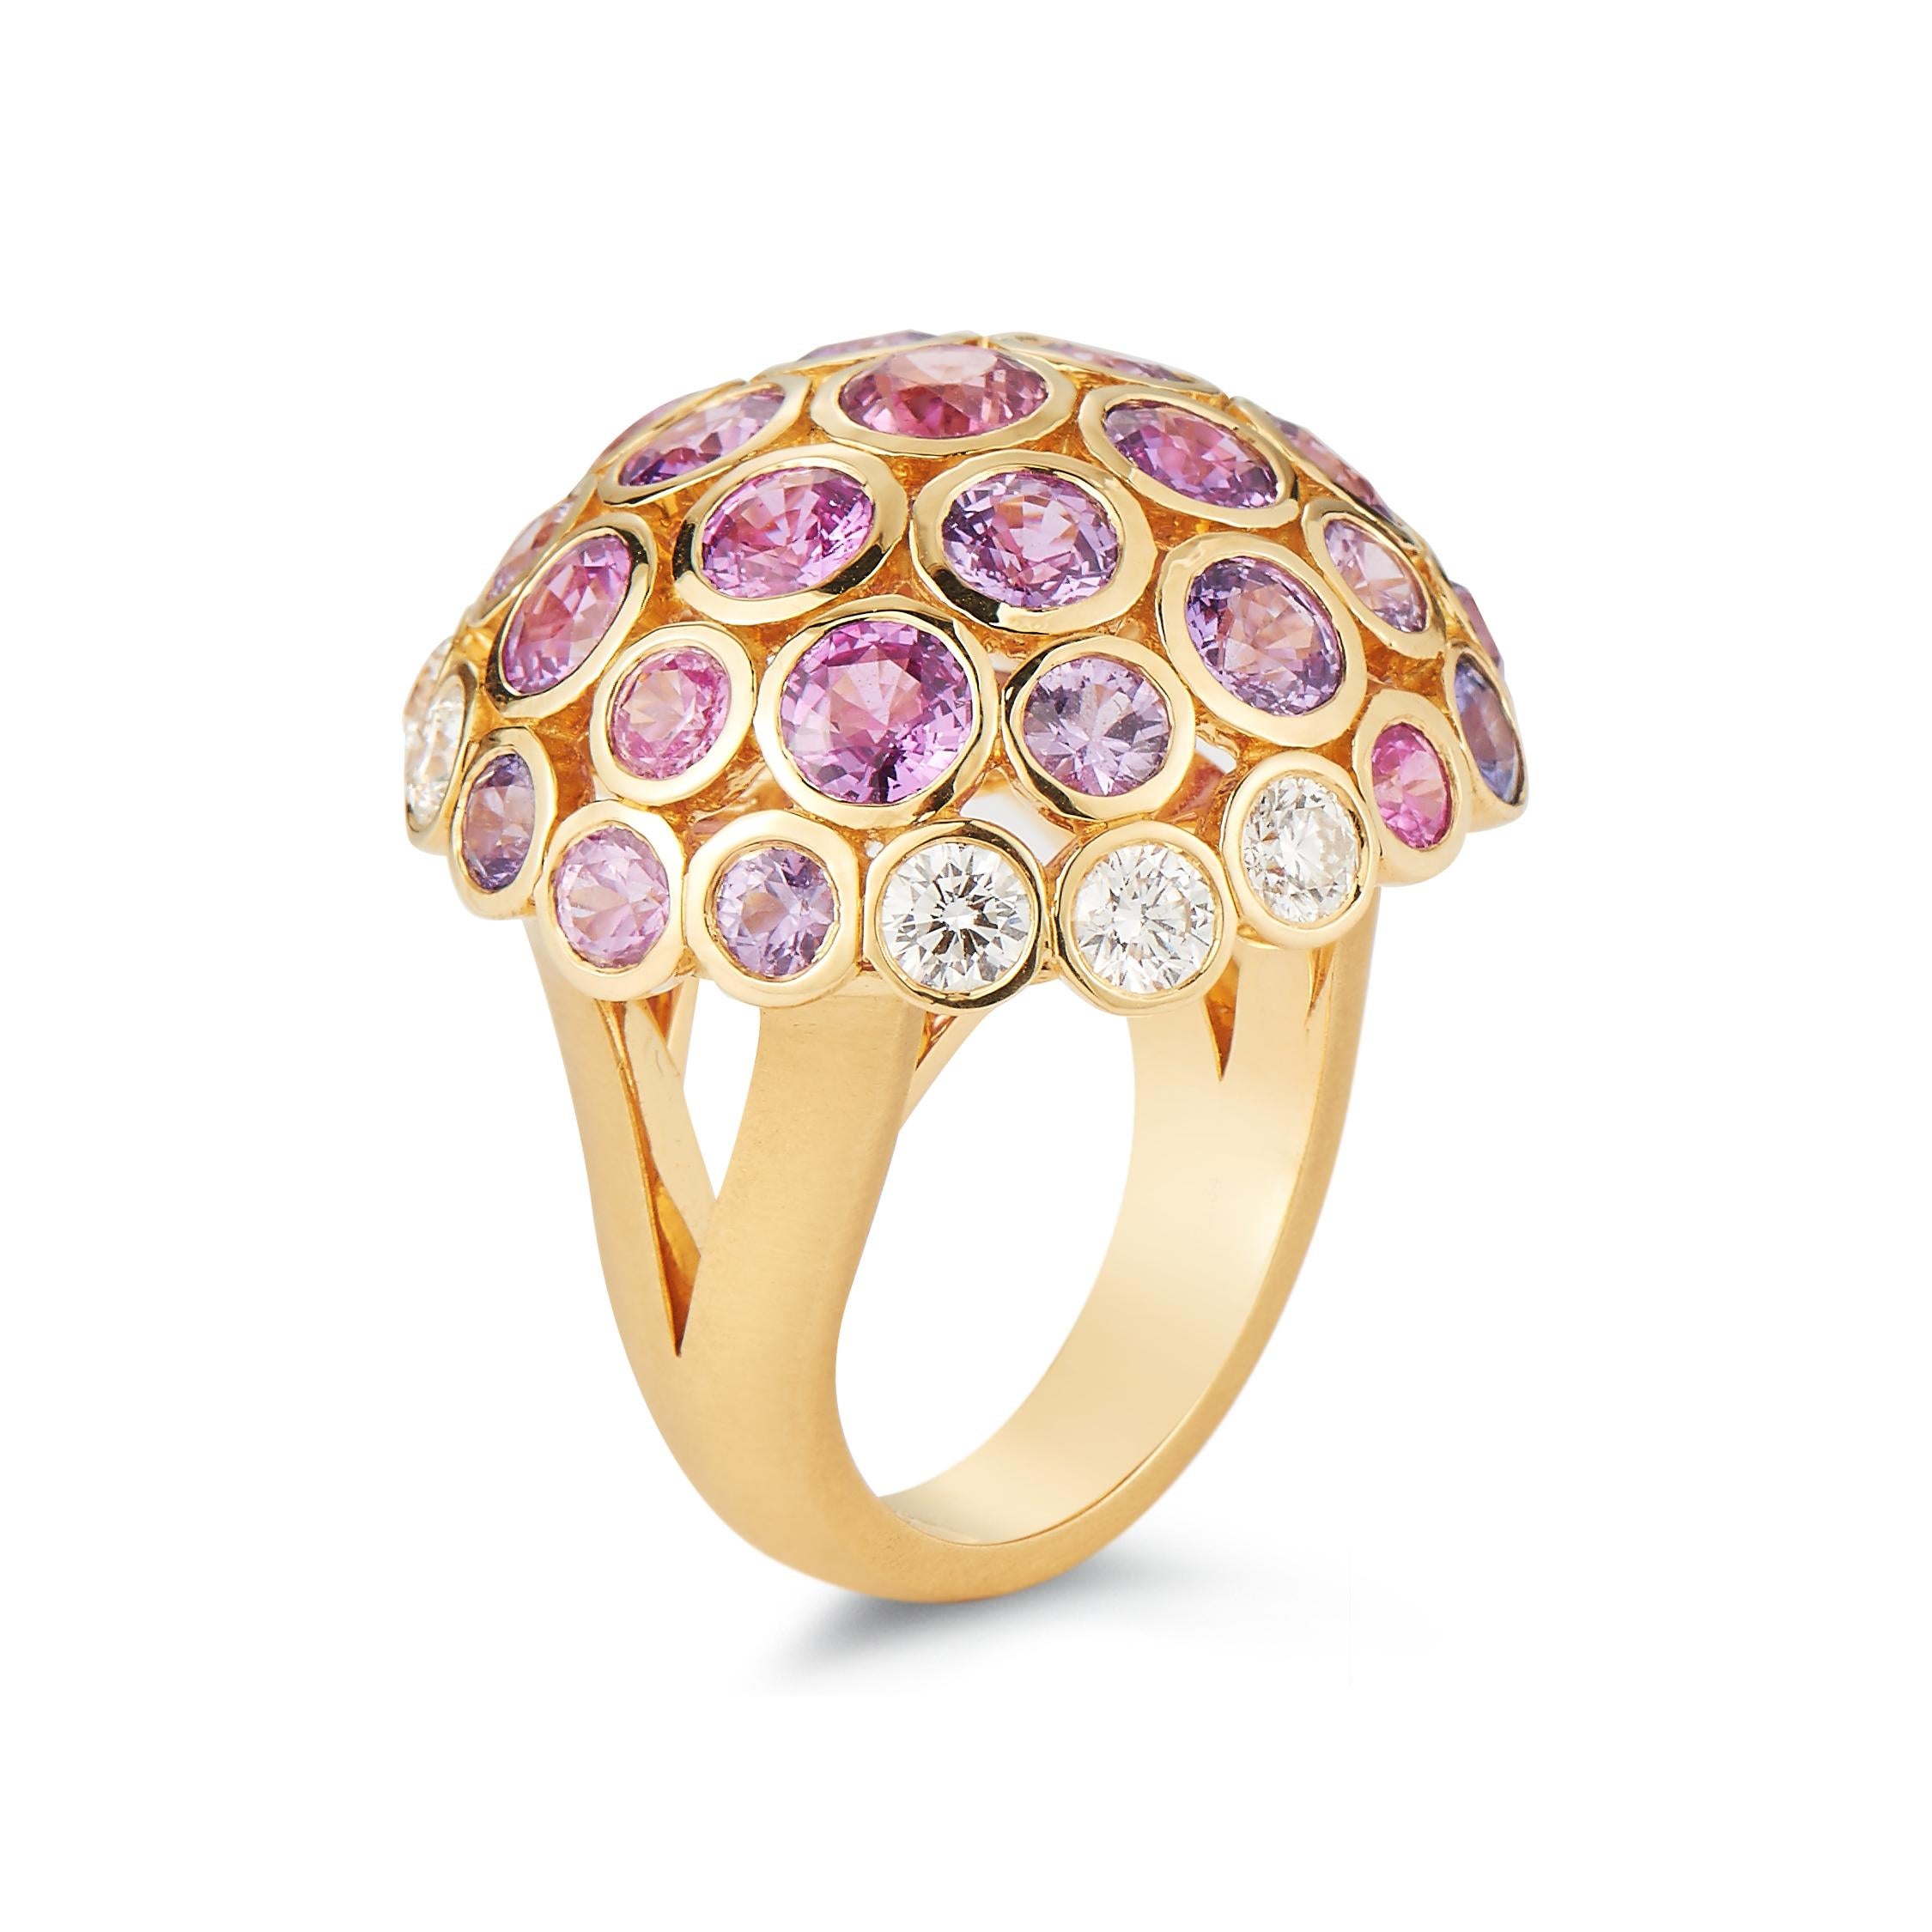 Geared towards today’s confident woman with cool, circular designs rendered in 18k satin finish yellow gold, this daring Carelle Disco Dots Color Sapphire Mushroom Ring sparkles wildly with a mélange of 9.00ct purple and pink sapphires, and 1.34ct